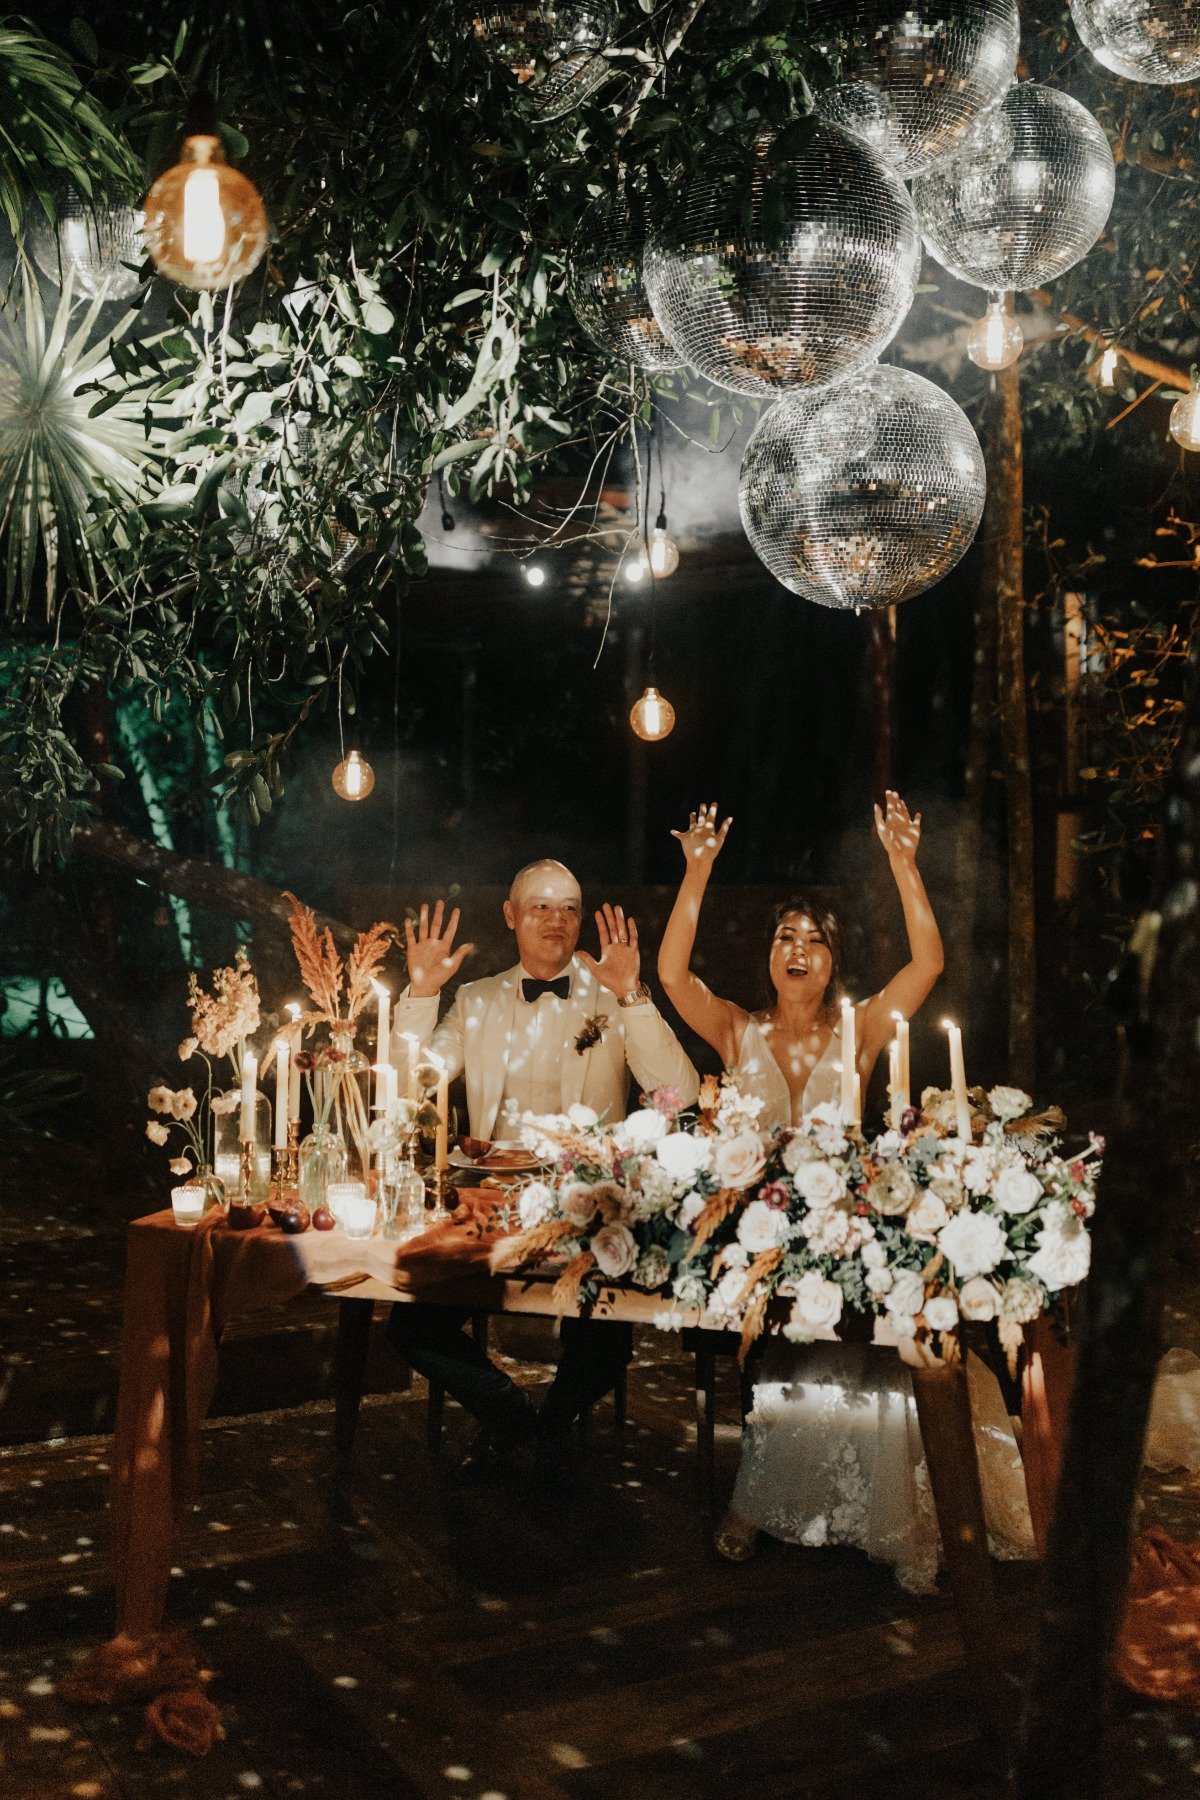 The Secret To Inspiring Your Vendors To Go Over The Top For Your Wedding